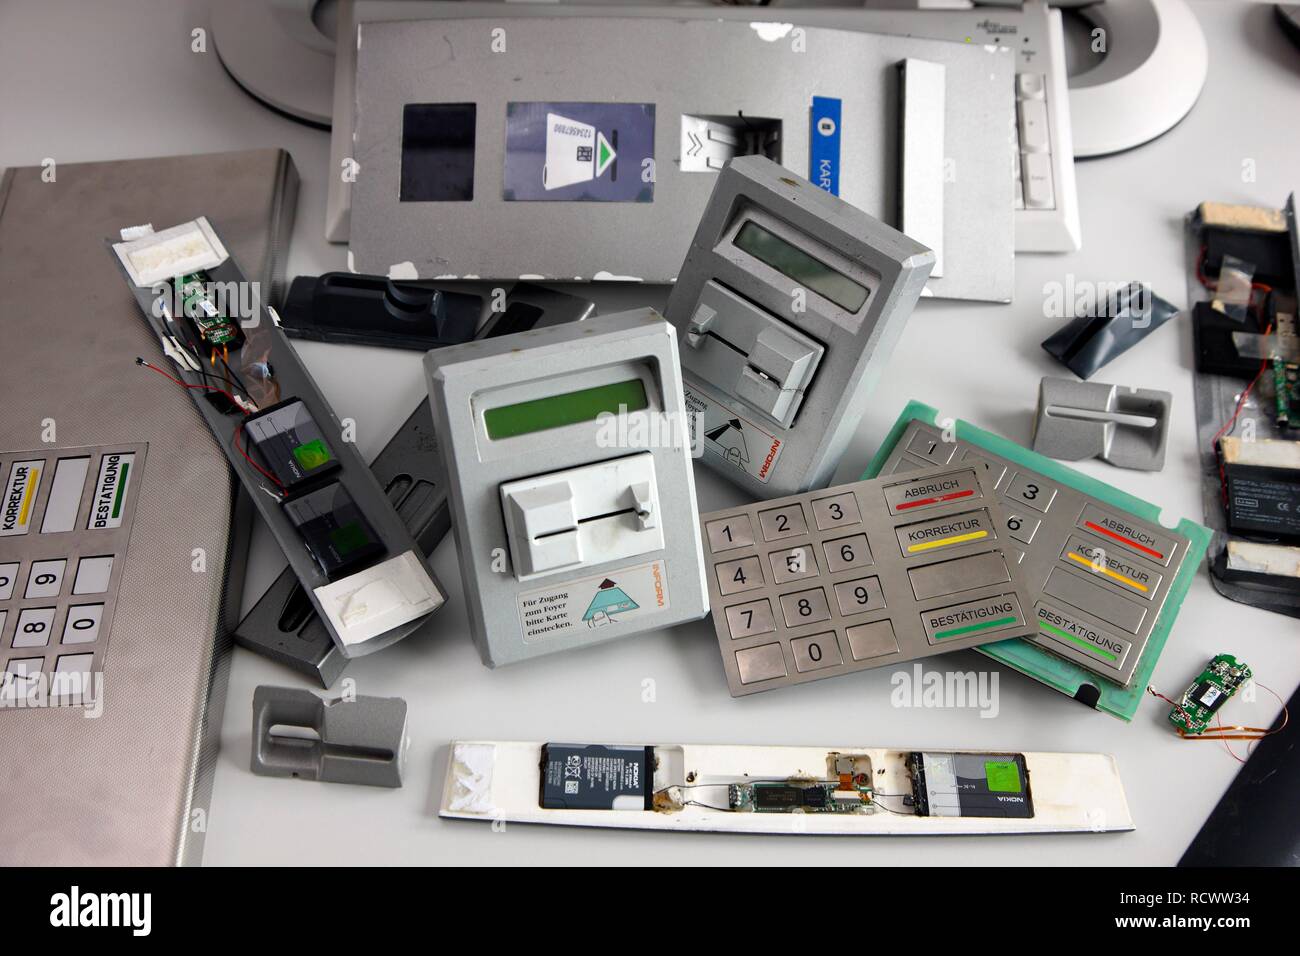 Seized equipment for skimming, tampering with ATMs, fake keyboards, card readers, cameras to record PINs, presented at a press Stock Photo